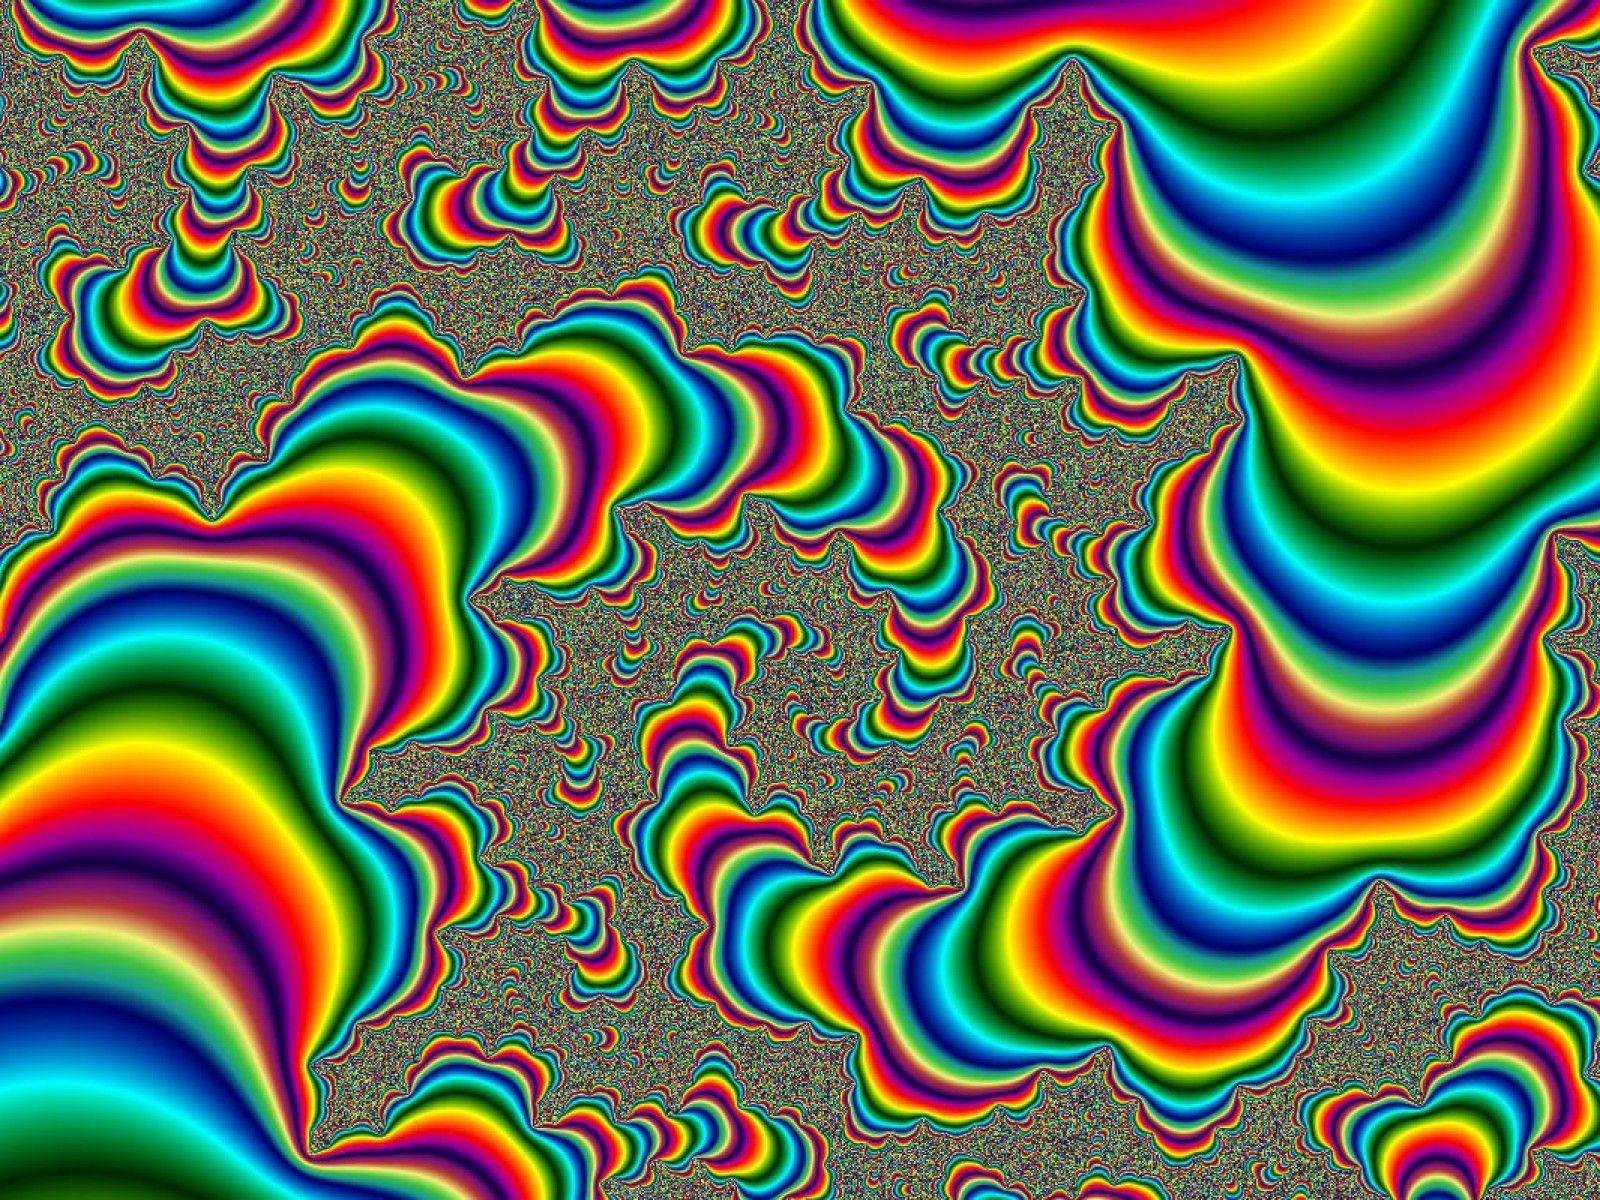 1600 x 1200 · jpeg - Moving Optical Illusions Wallpapers - Wallpaper Cave